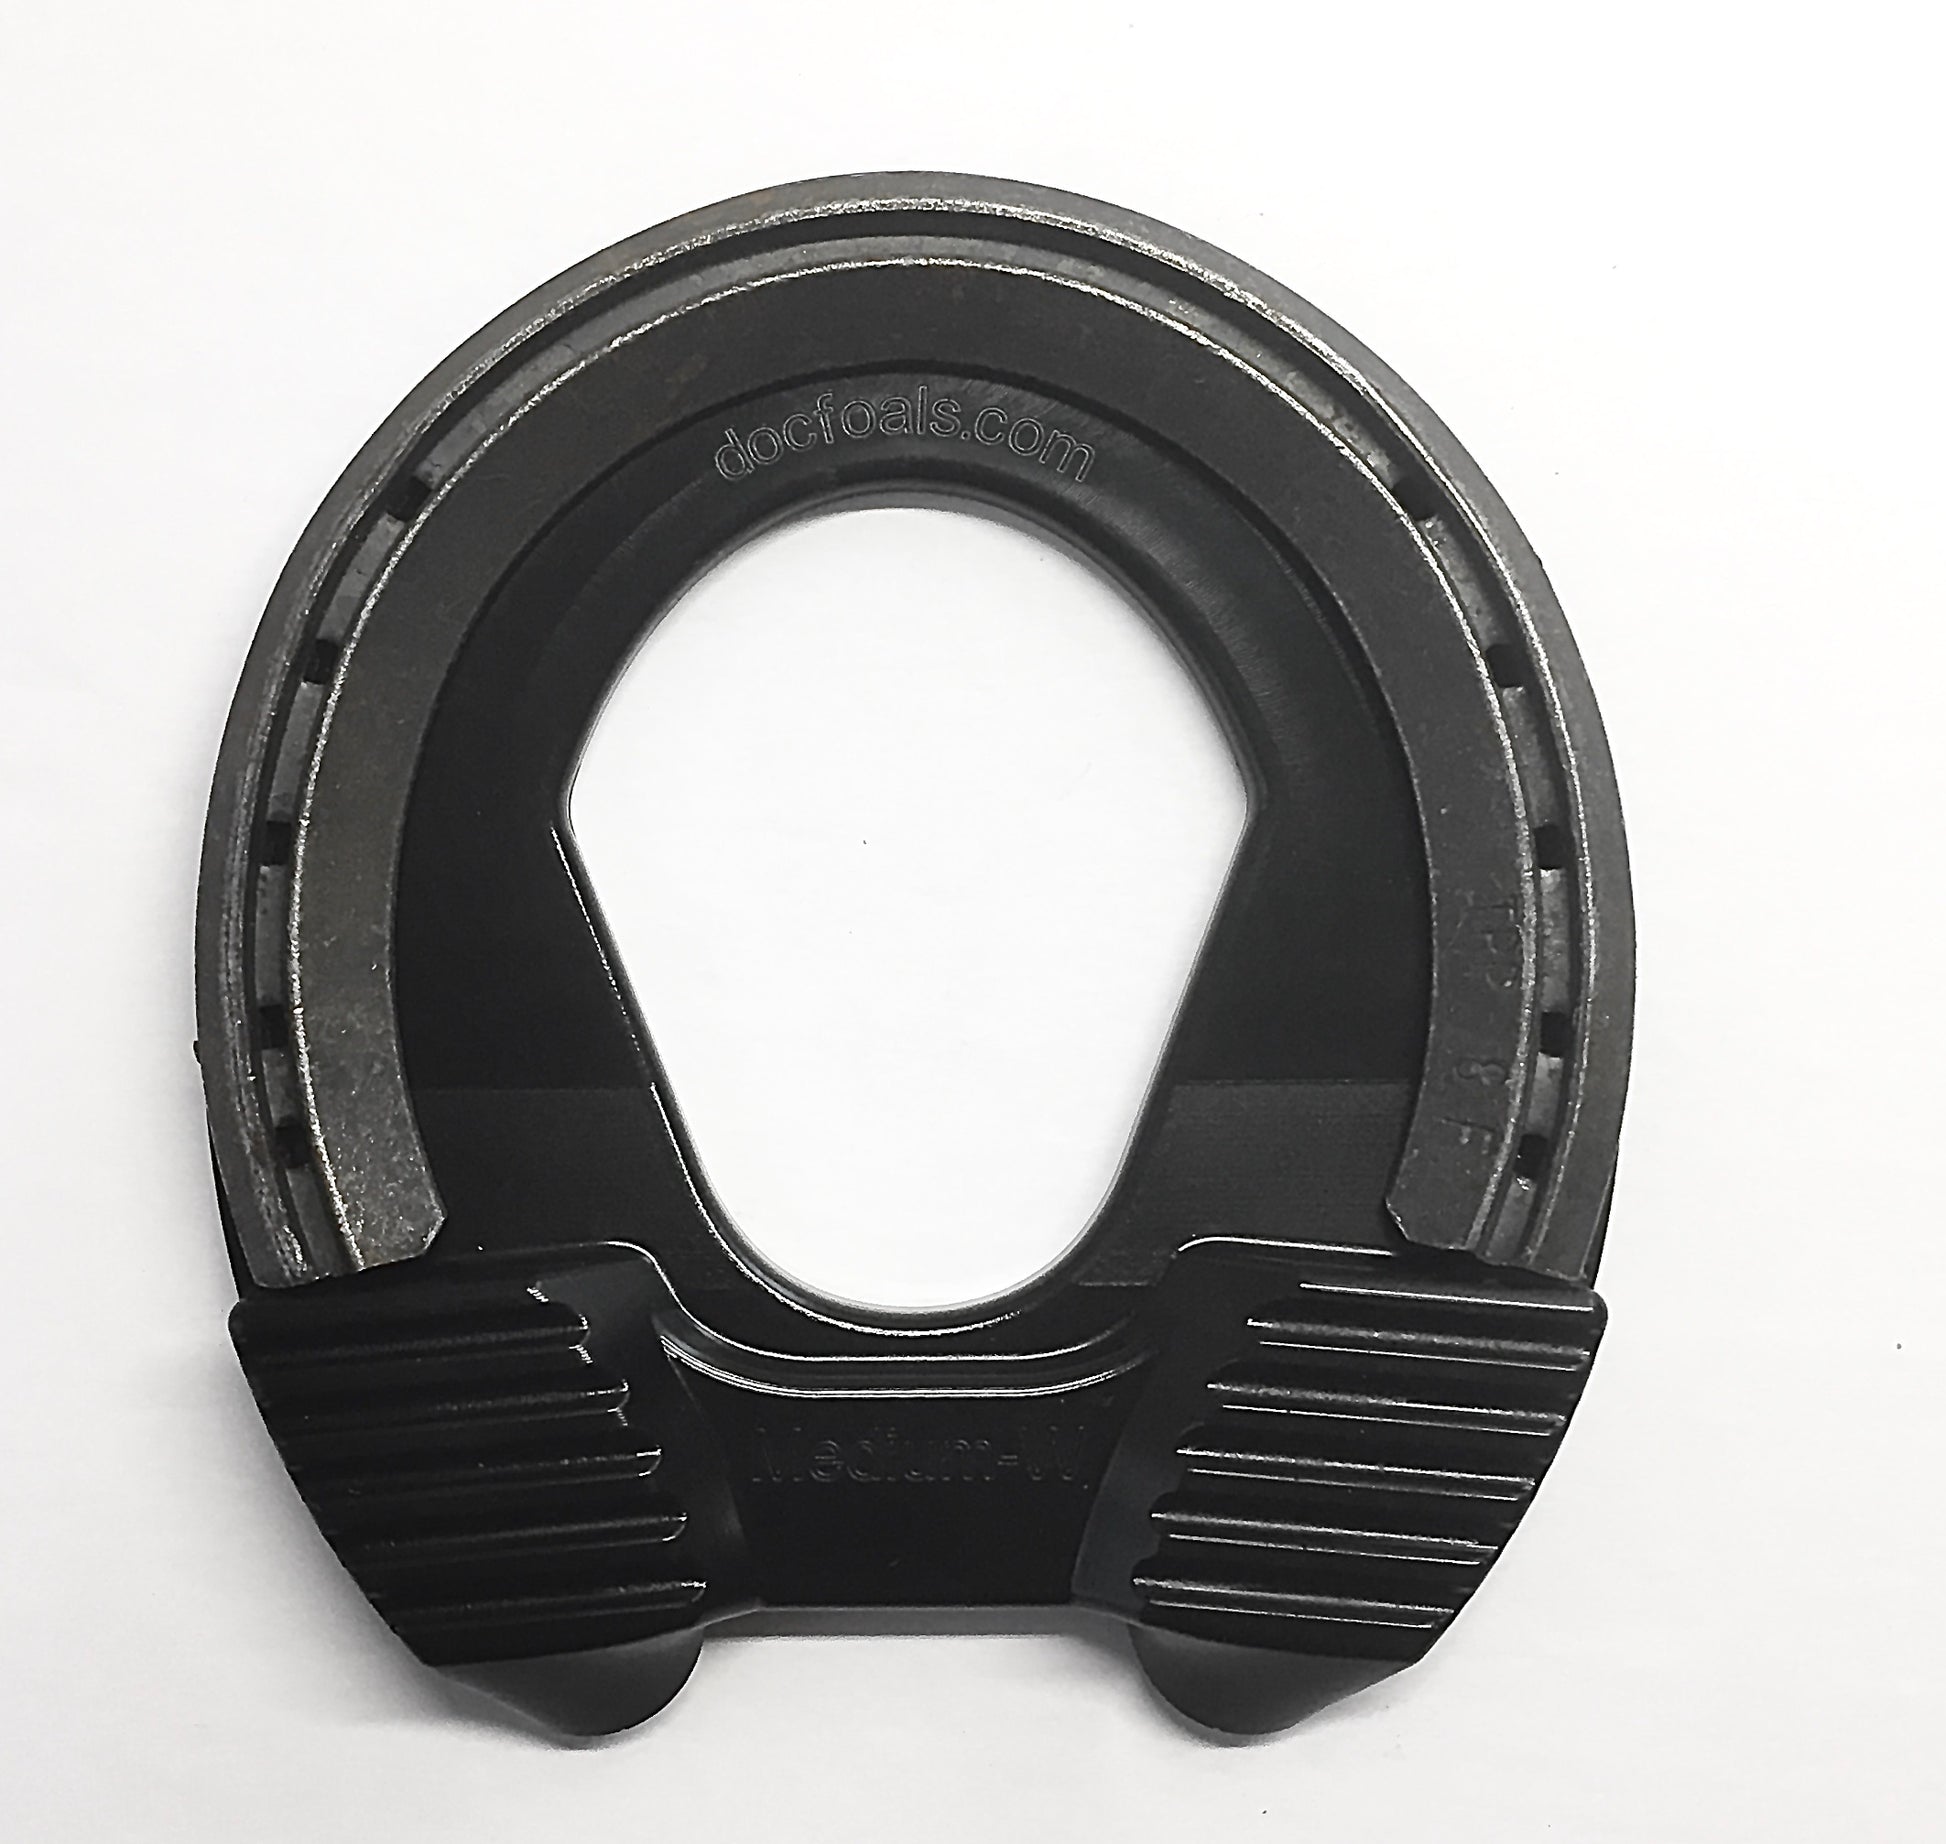 The Black Pad - Cushioned Heel Pad for Horses